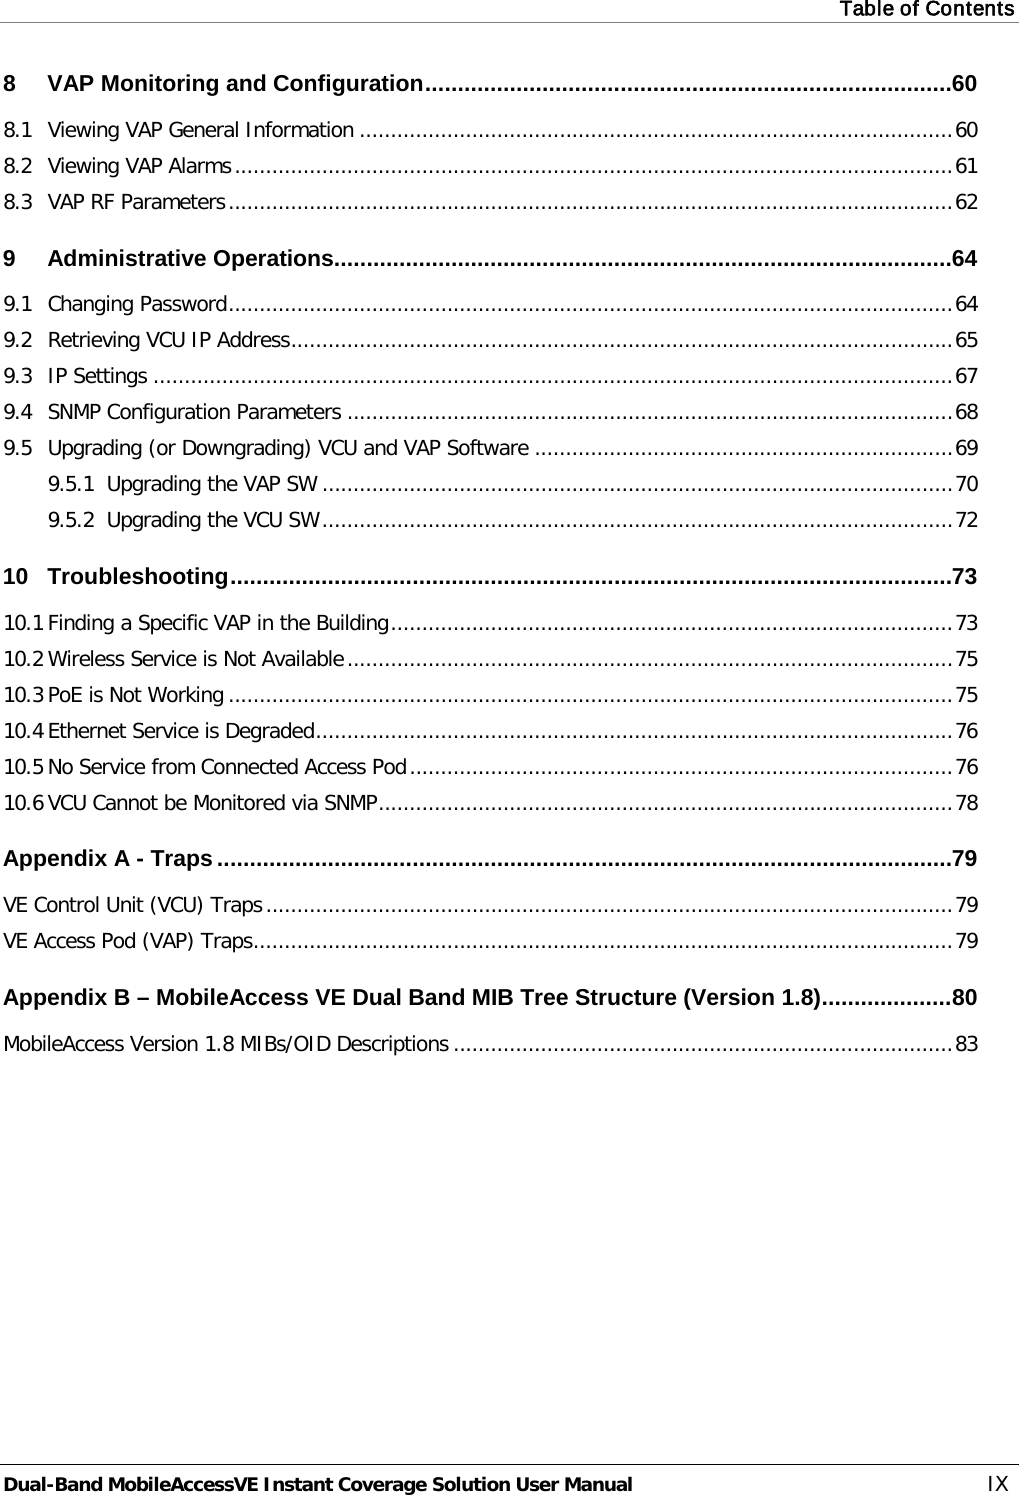 Table of Contents  Dual-Band MobileAccessVE Instant Coverage Solution User Manual IX 8 VAP Monitoring and Configuration ................................................................................. 60 8.1 Viewing VAP General Information ............................................................................................... 60 8.2 Viewing VAP Alarms ................................................................................................................... 61 8.3 VAP RF Parameters .................................................................................................................... 62 9 Administrative Operations............................................................................................... 64 9.1 Changing Password .................................................................................................................... 64 9.2 Retrieving VCU IP Address .......................................................................................................... 65 9.3 IP Settings ................................................................................................................................ 67 9.4 SNMP Configuration Parameters ................................................................................................. 68 9.5 Upgrading (or Downgrading) VCU and VAP Software ................................................................... 69 9.5.1 Upgrading the VAP SW ..................................................................................................... 70 9.5.2 Upgrading the VCU SW ..................................................................................................... 72 10 Troubleshooting ............................................................................................................... 73 10.1 Finding a Specific VAP in the Building .......................................................................................... 73 10.2 Wireless Service is Not Available ................................................................................................. 75 10.3 PoE is Not Working .................................................................................................................... 75 10.4 Ethernet Service is Degraded ...................................................................................................... 76 10.5 No Service from Connected Access Pod ....................................................................................... 76 10.6 VCU Cannot be Monitored via SNMP ............................................................................................ 78 Appendix A - Traps ................................................................................................................. 79 VE Control Unit (VCU) Traps .............................................................................................................. 79 VE Access Pod (VAP) Traps ................................................................................................................ 79 Appendix B – MobileAccess VE Dual Band MIB Tree Structure (Version 1.8) .................... 80 MobileAccess Version 1.8 MIBs/OID Descriptions ................................................................................ 83 